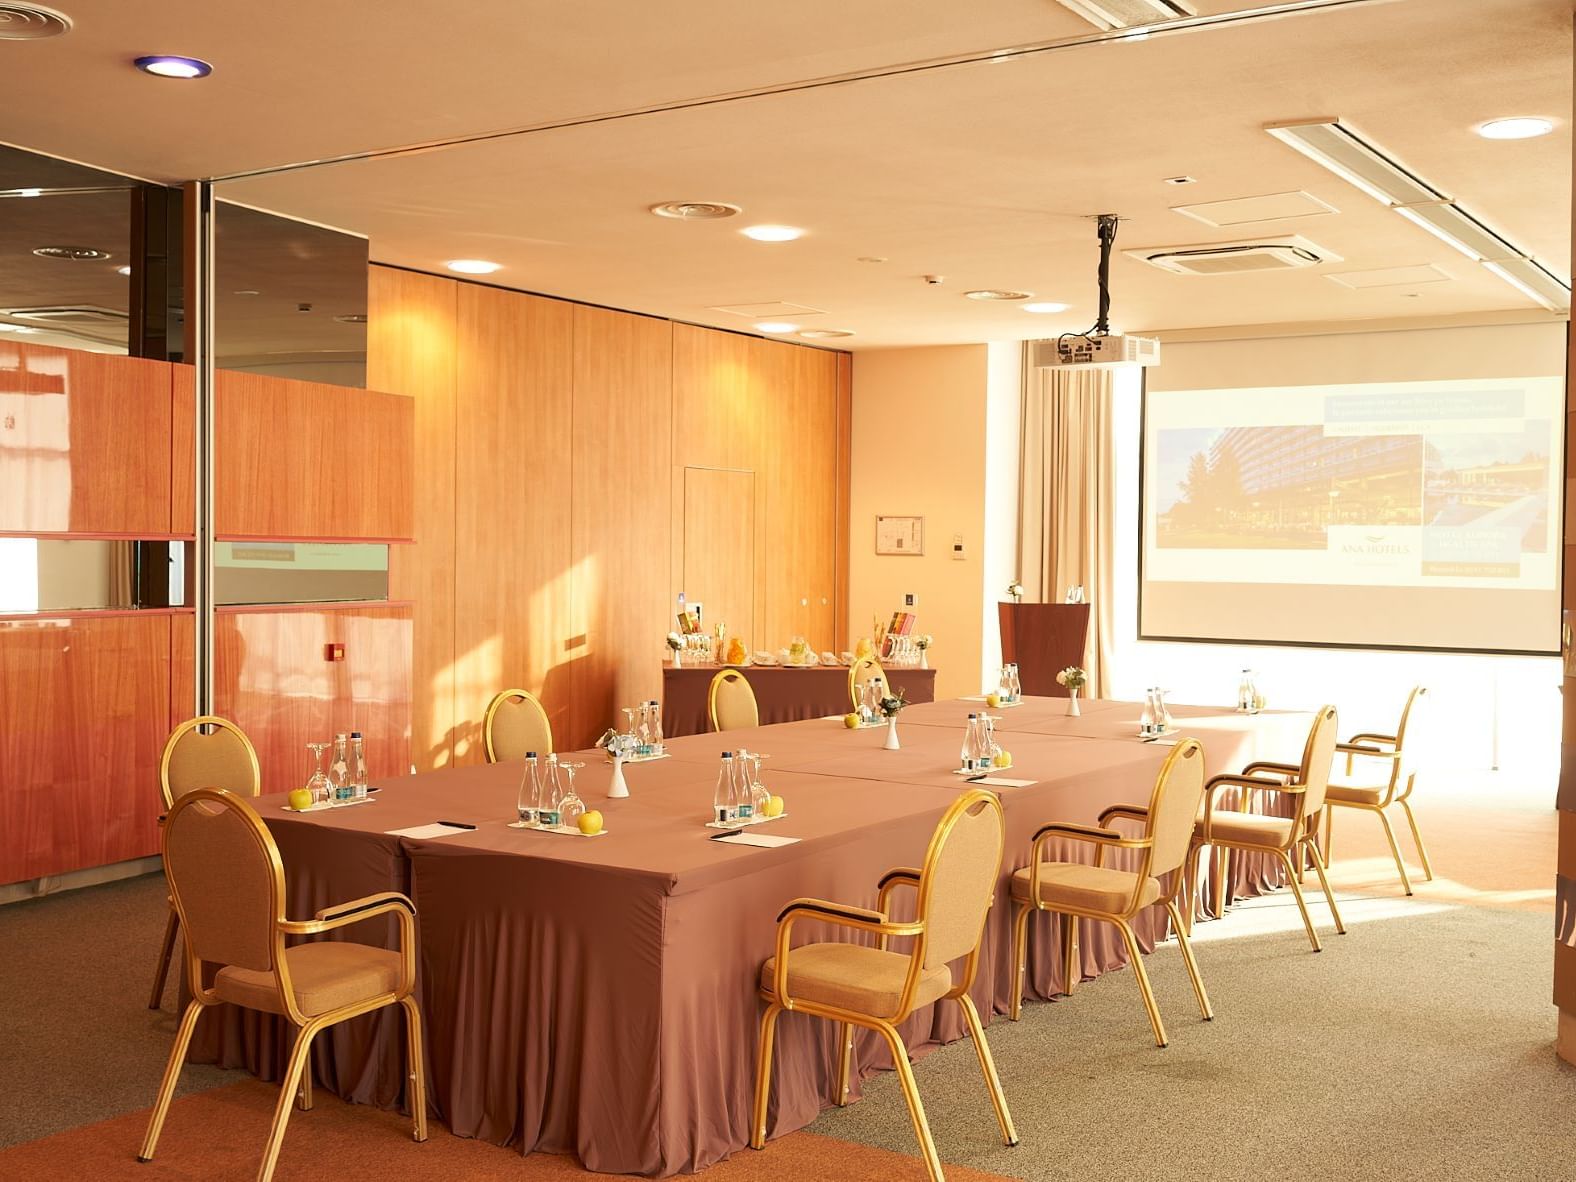 Interior of Urania Room for meetings at Ana Hotels Europa